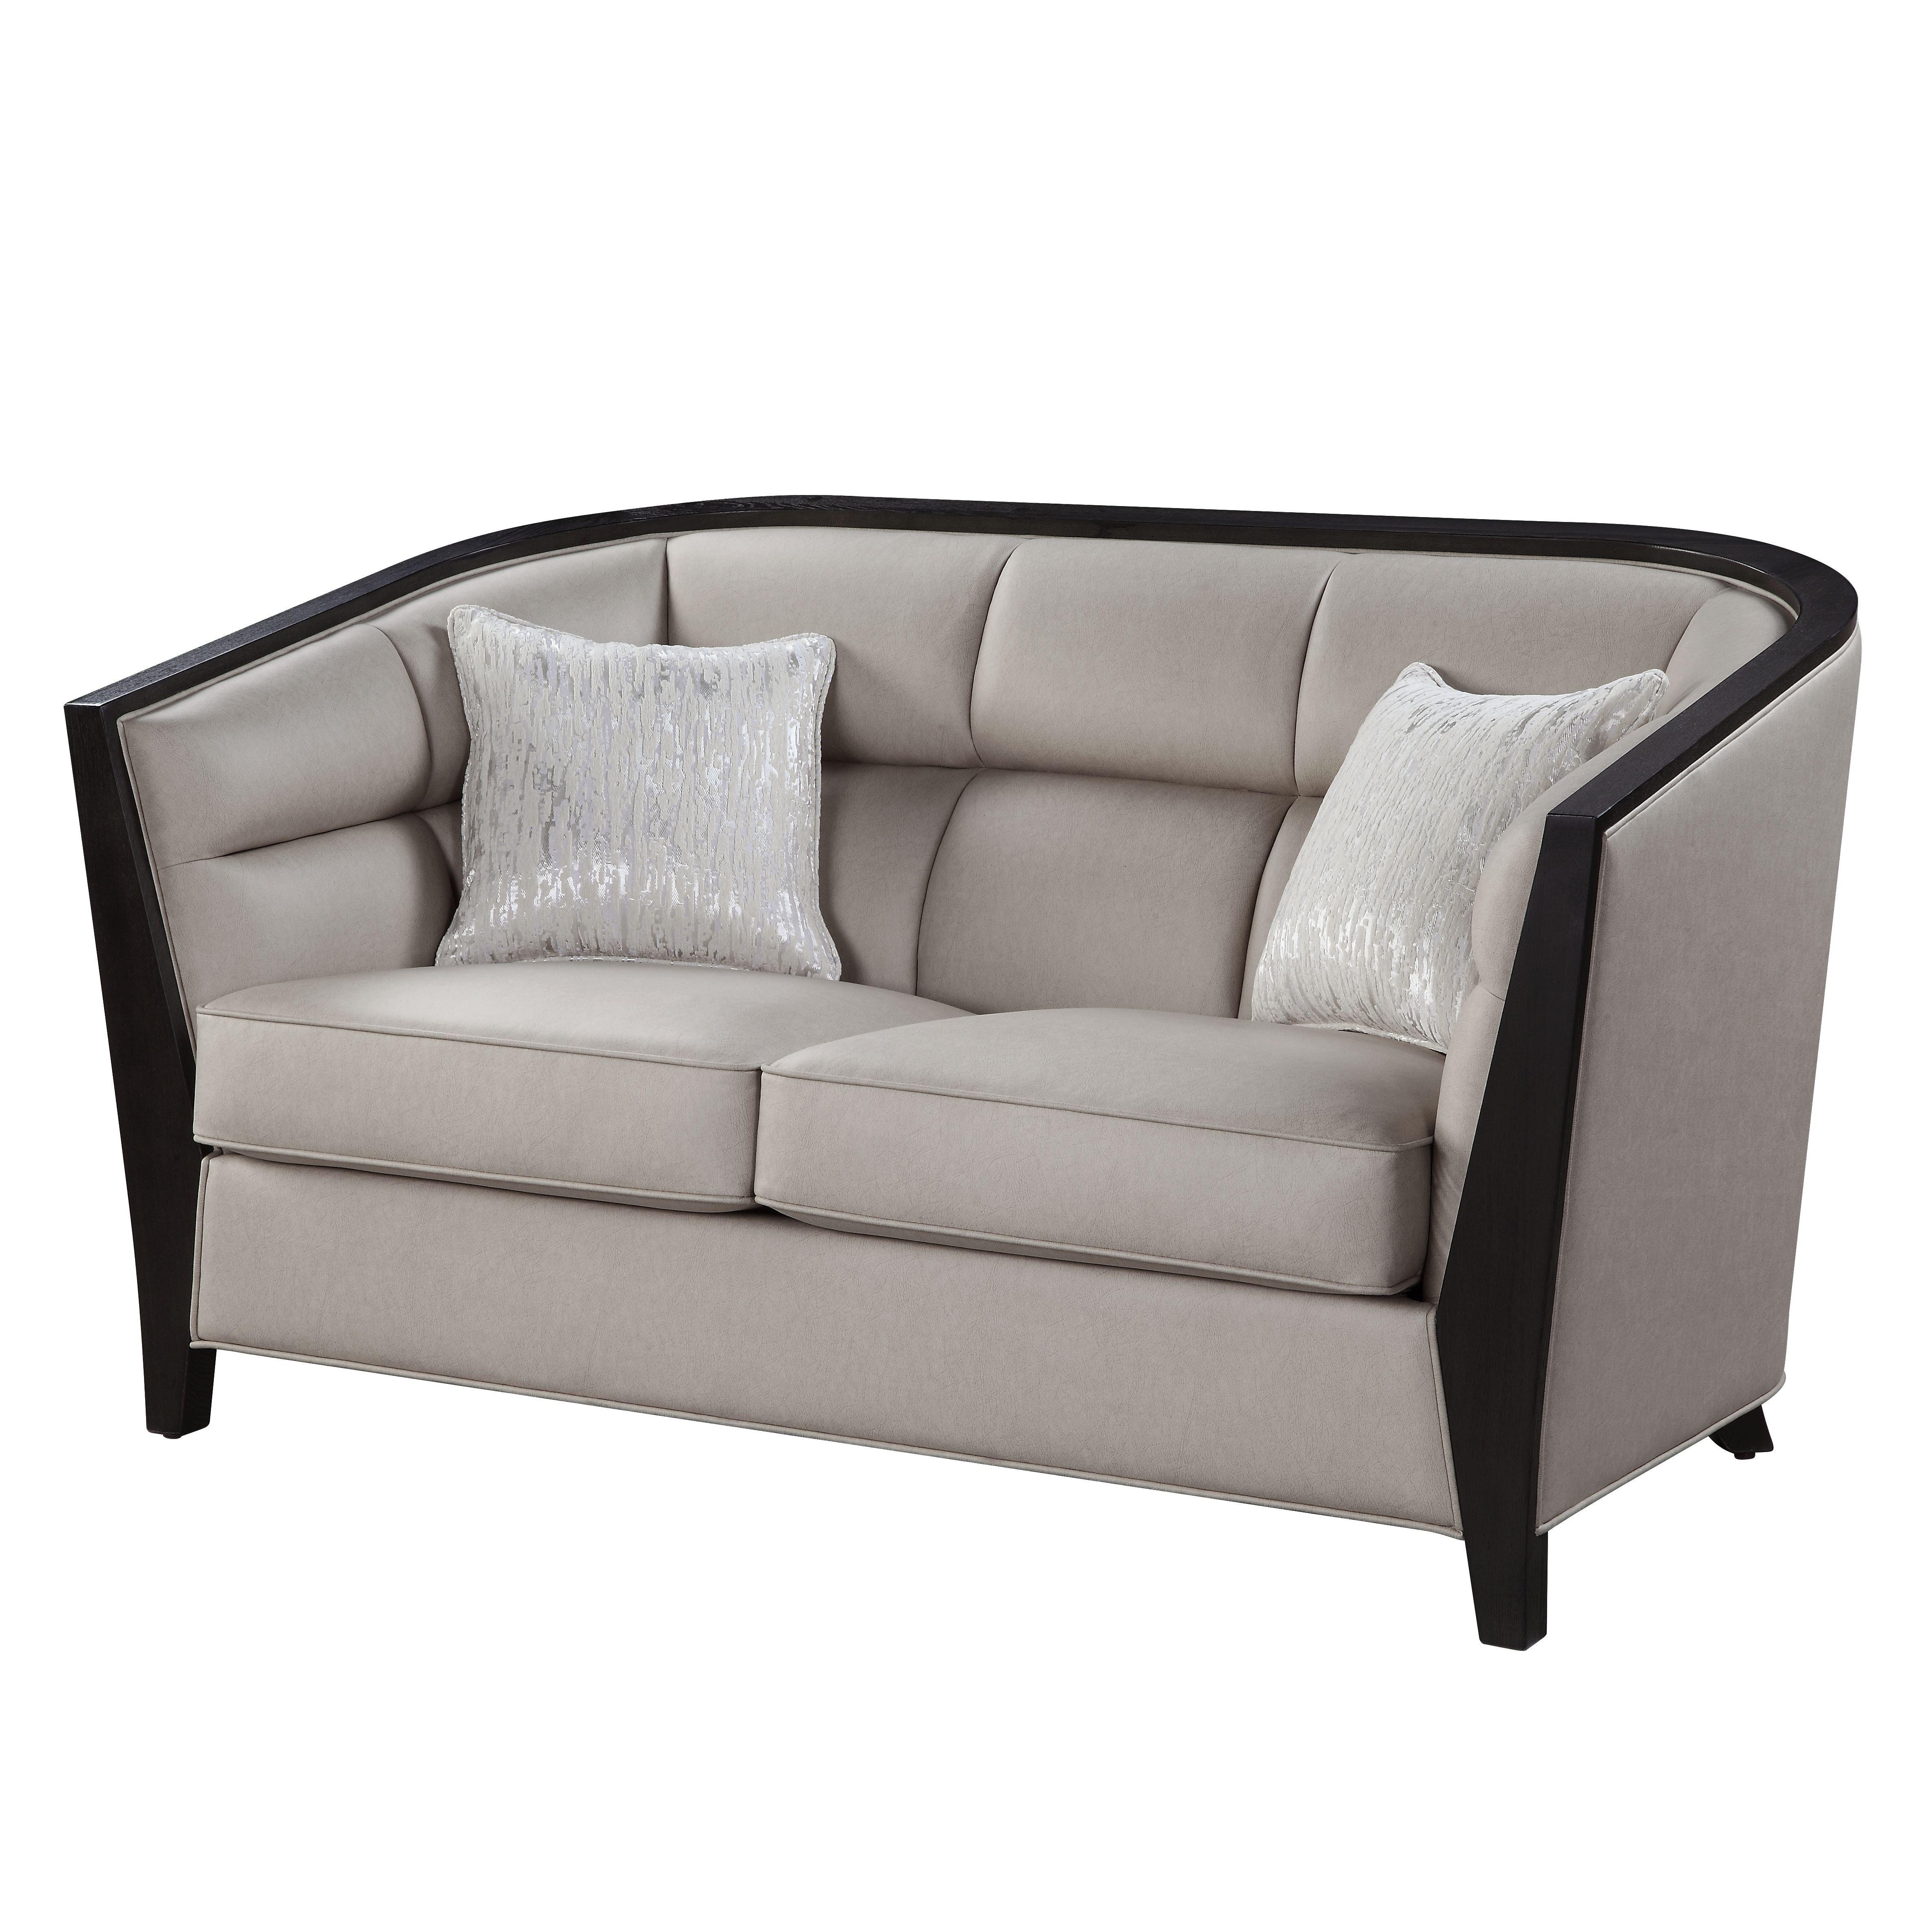 Contemporary, Classic Loveseat Zemocryss 54236 in Beige Fabric